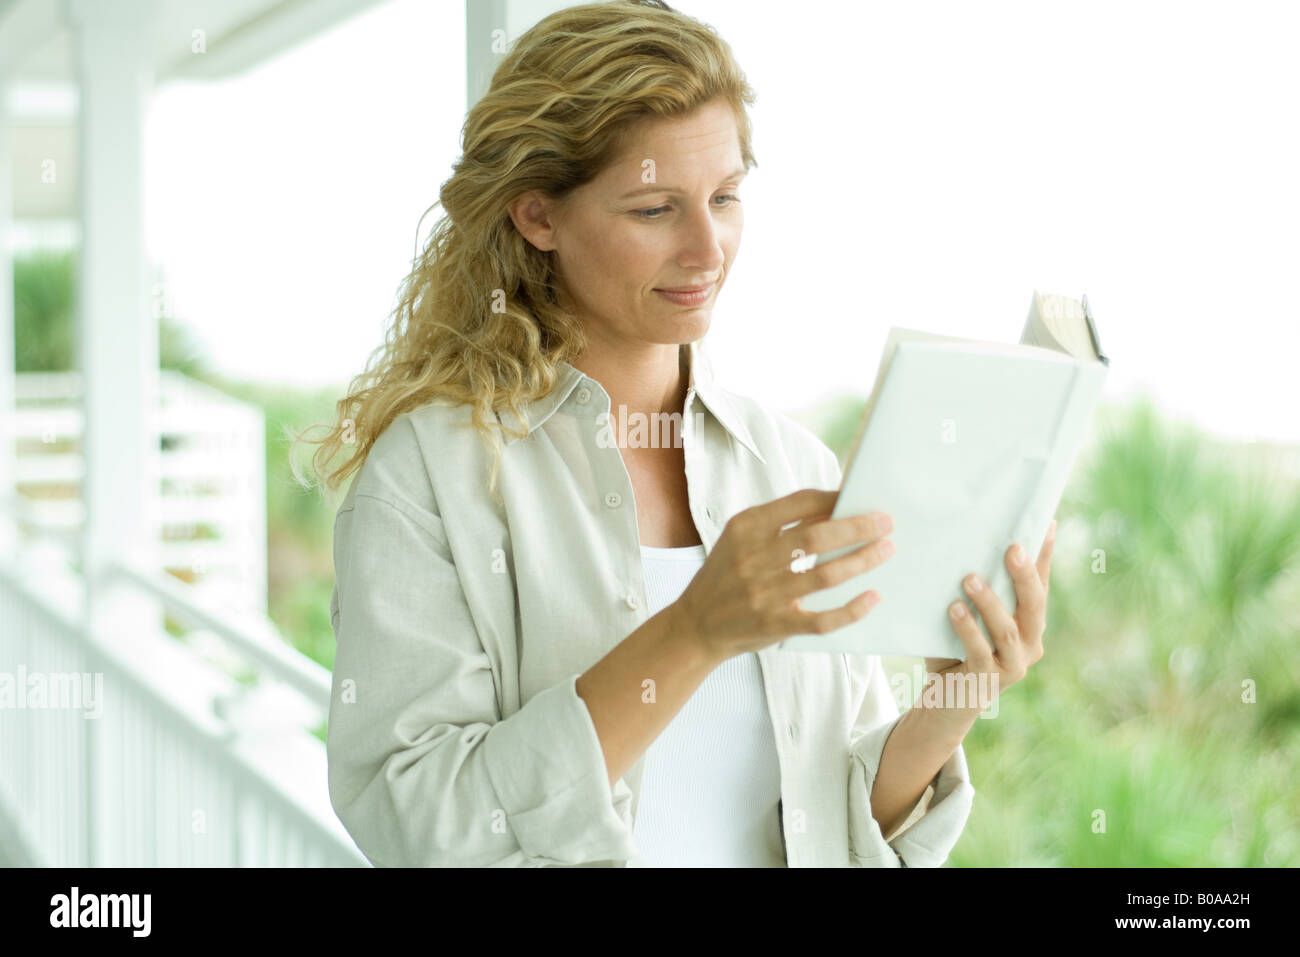 Woman standing on porch, reading book, close-up Stock Photo